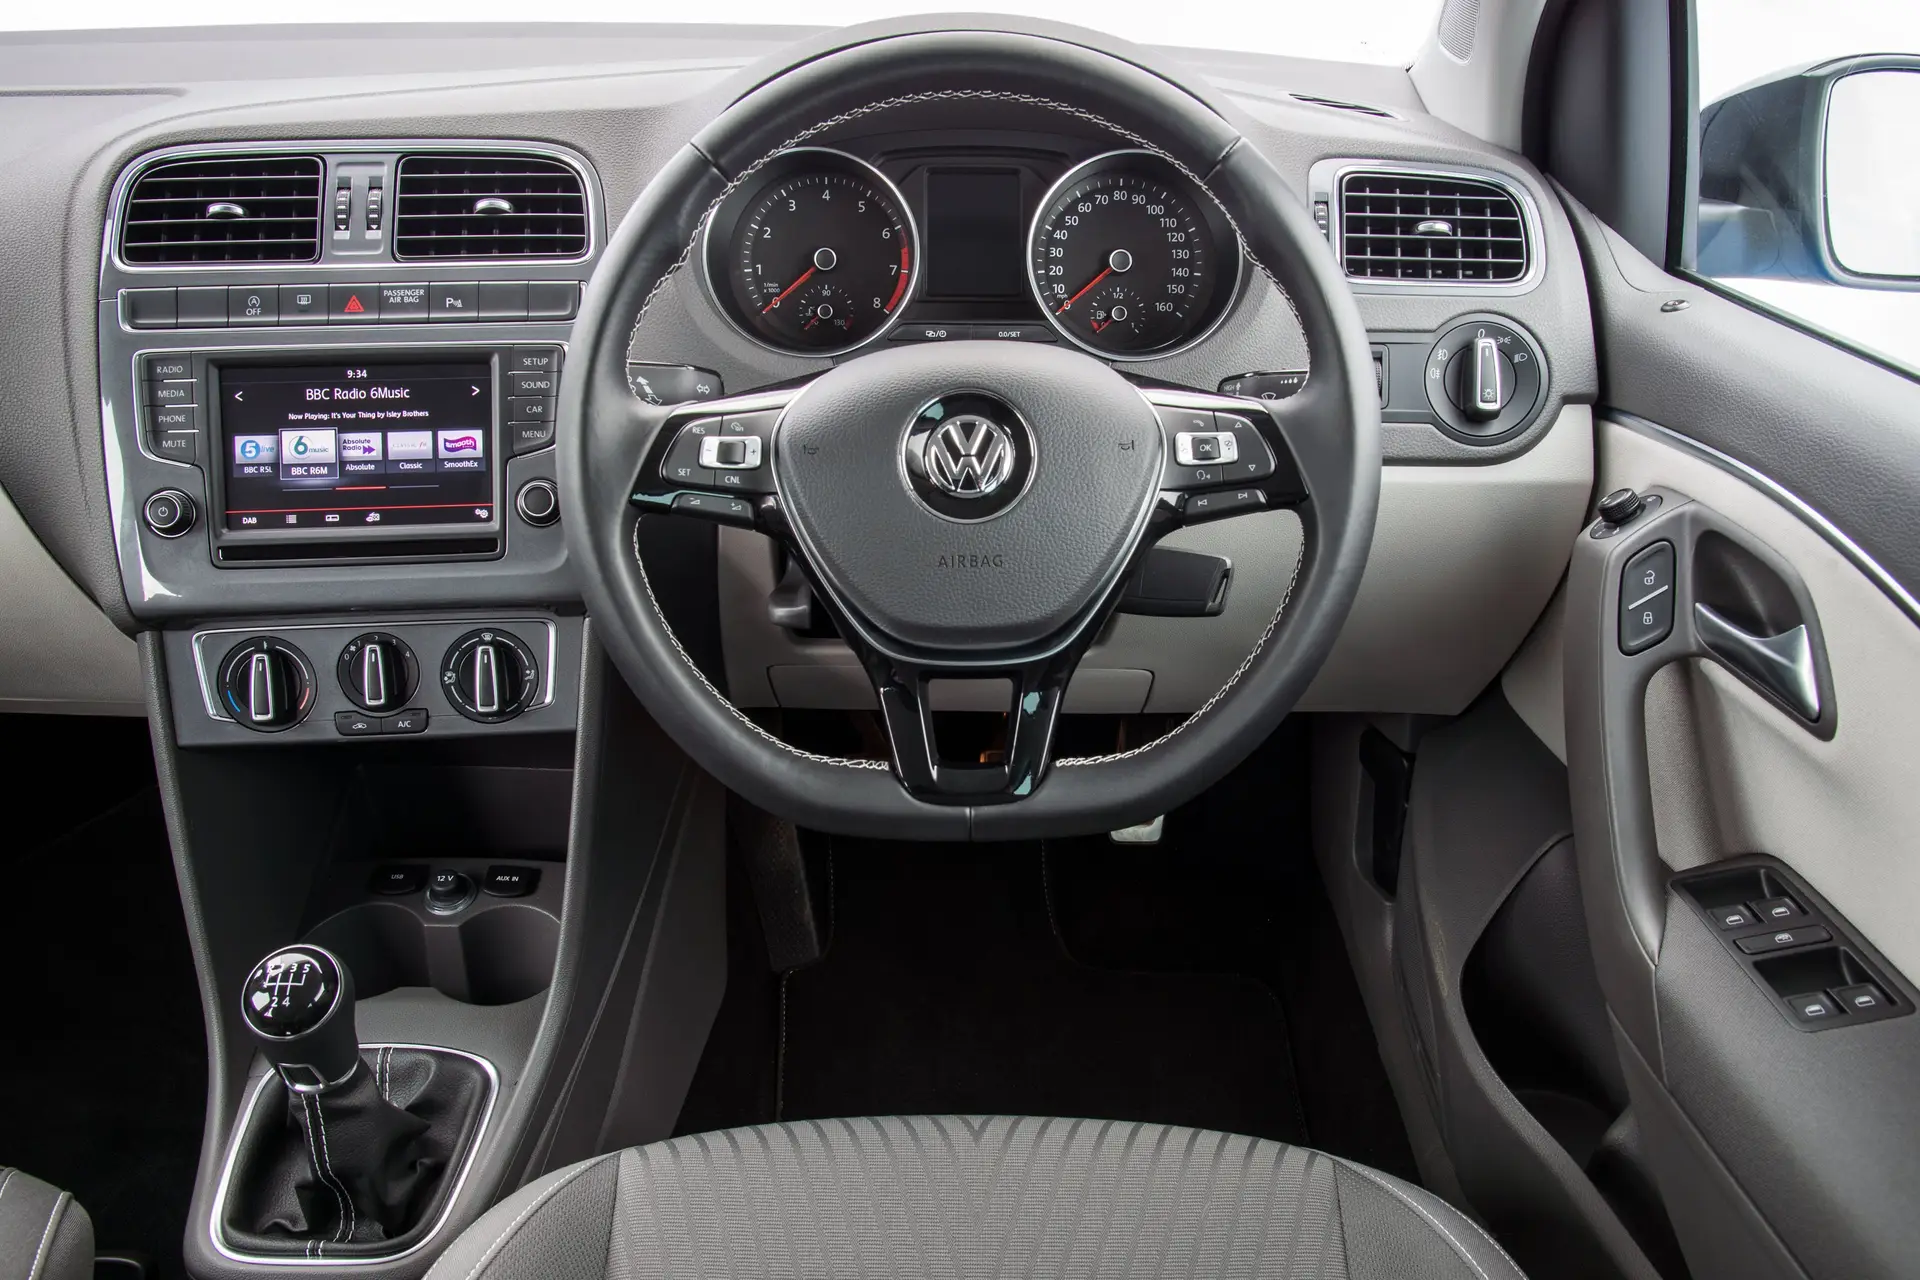  Volkswagen Polo (2009-2017) Review: interior close up photo of the Volkswagen Polo dashboard